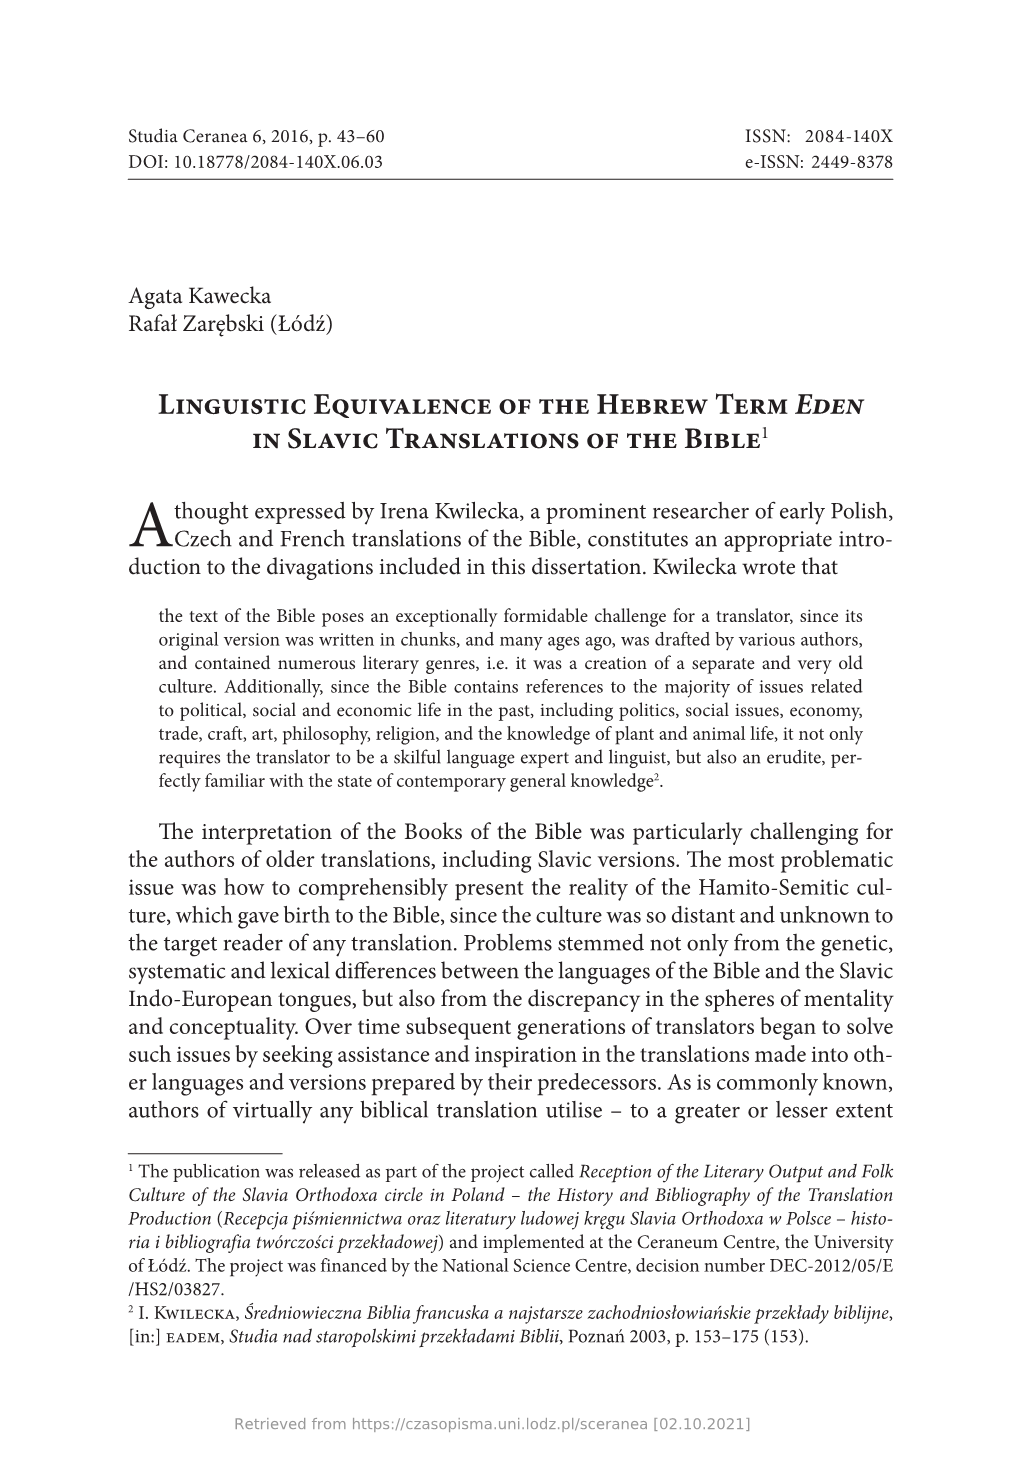 Linguistic Equivalence of the Hebrew Term Eden in Slavic Translations of the Bible1